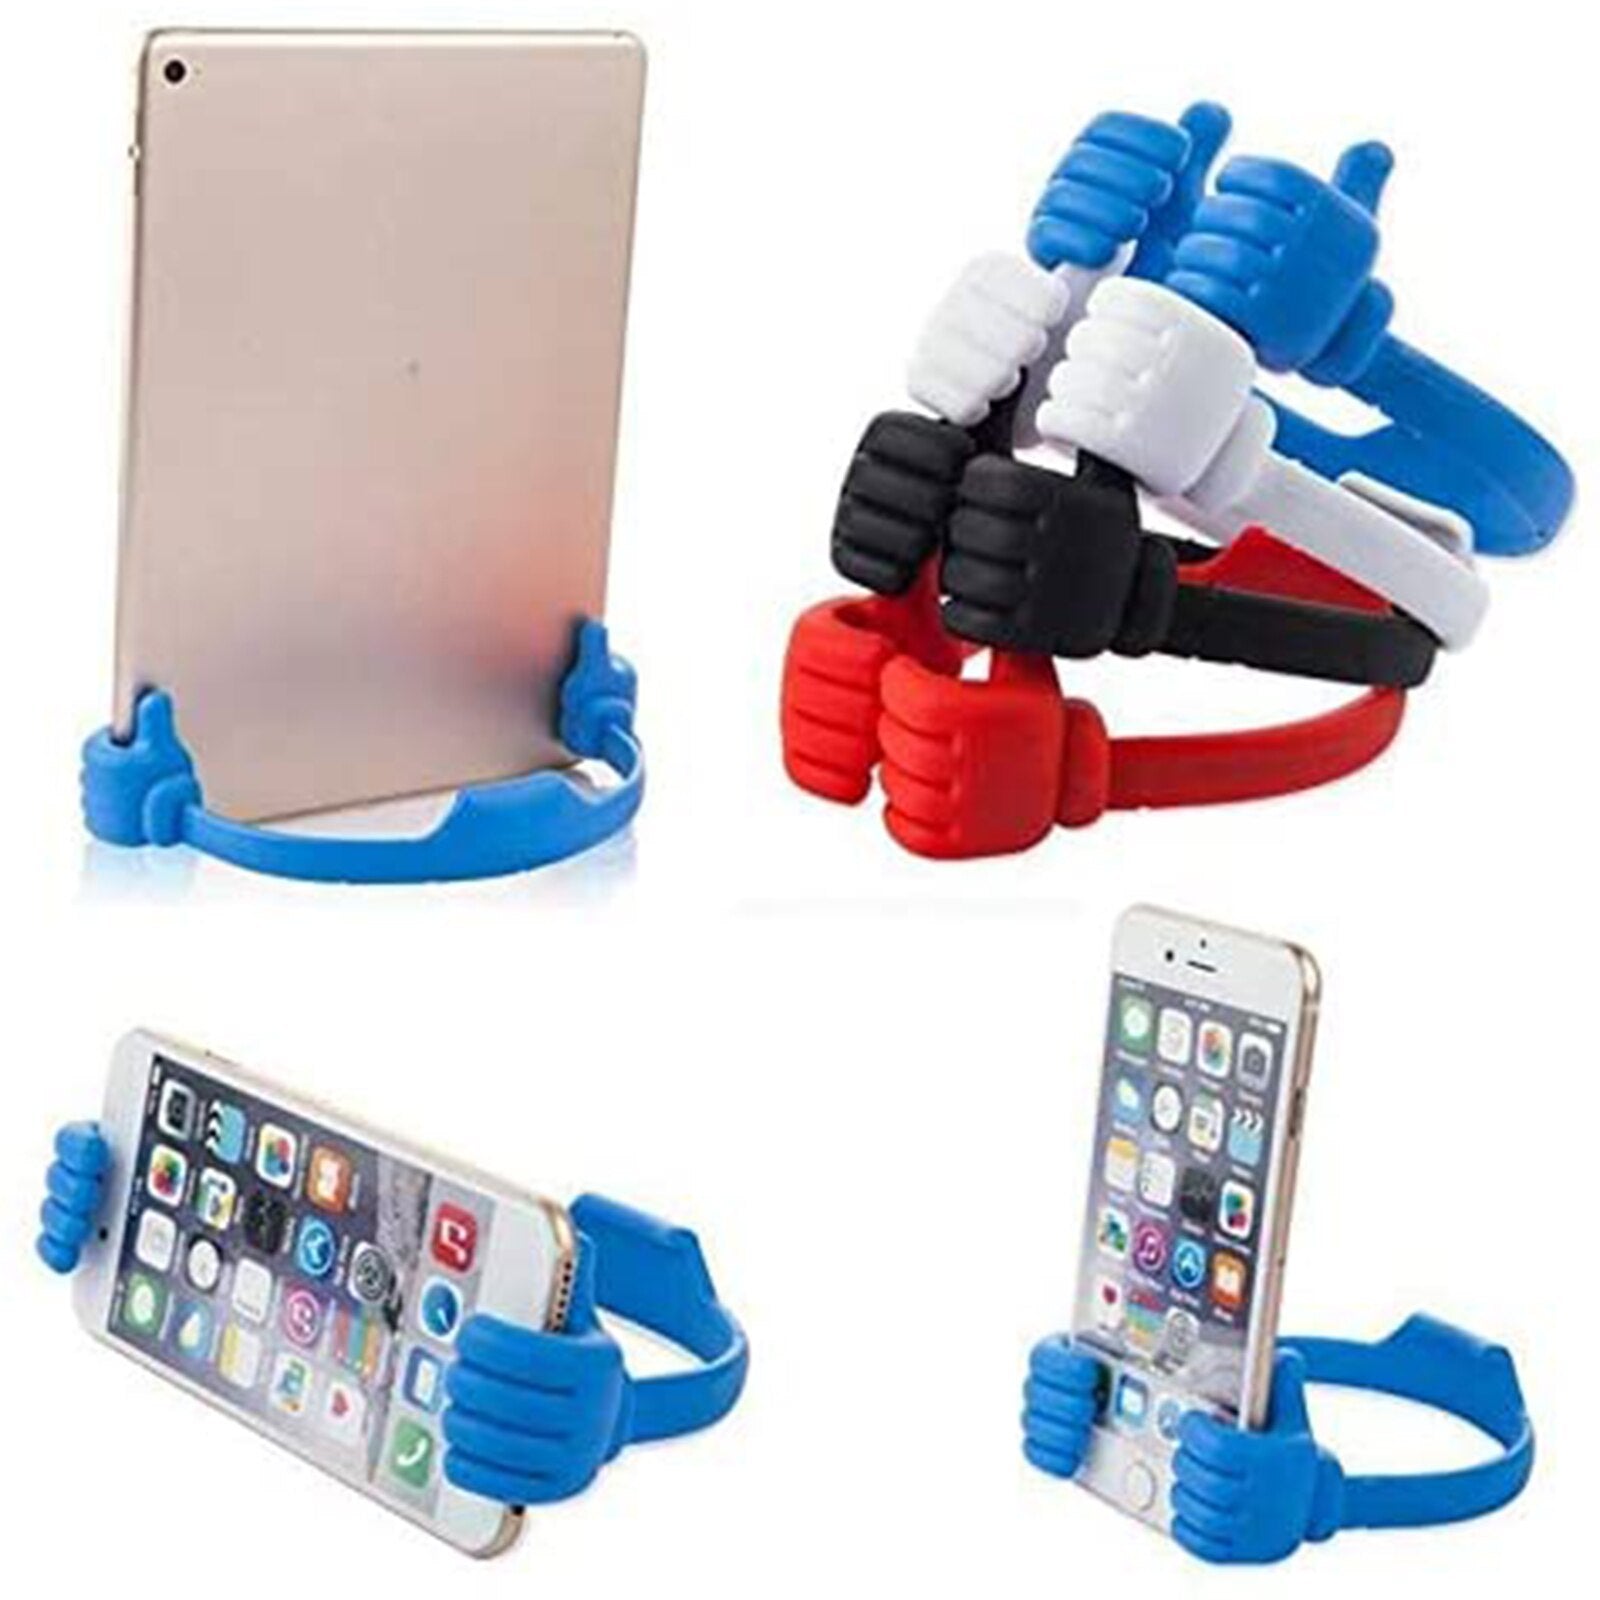 "Ultimate Lazy Bed Cell Phone Holder - Hands-Free Movie Watching Stand for Any Phone or Tablet"